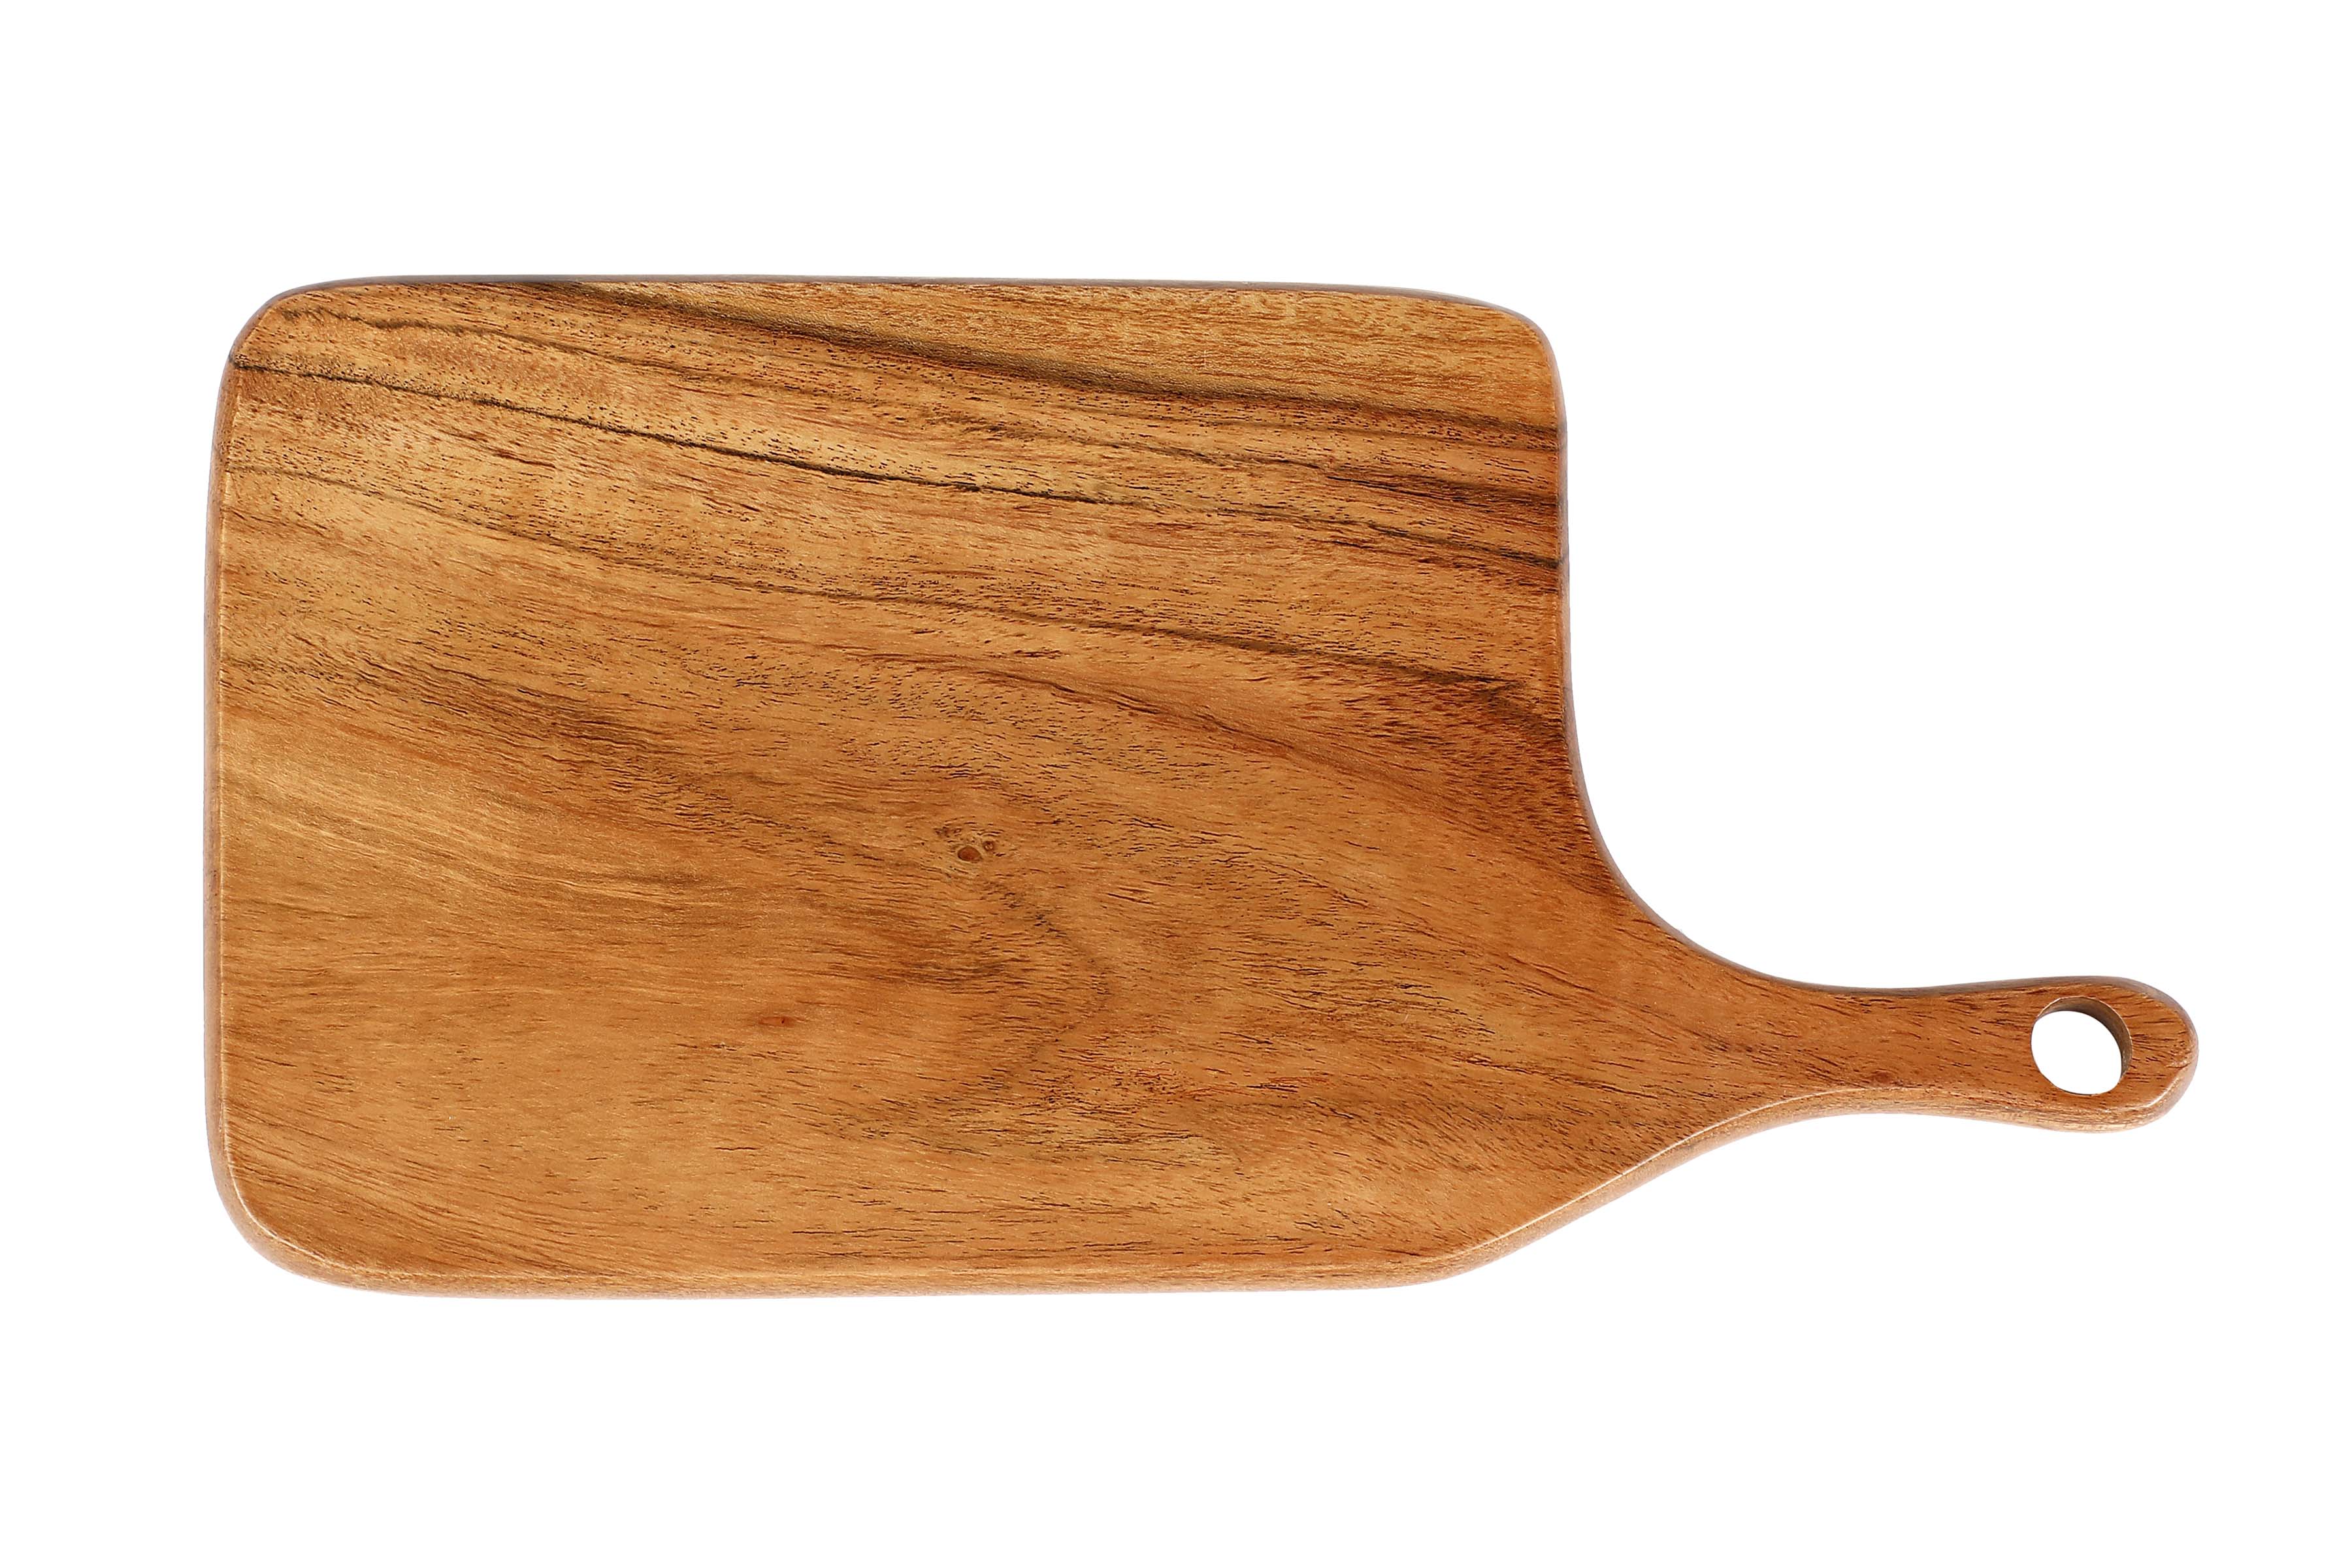  Best Acacia Wood Cutting Board with Handle Wooden